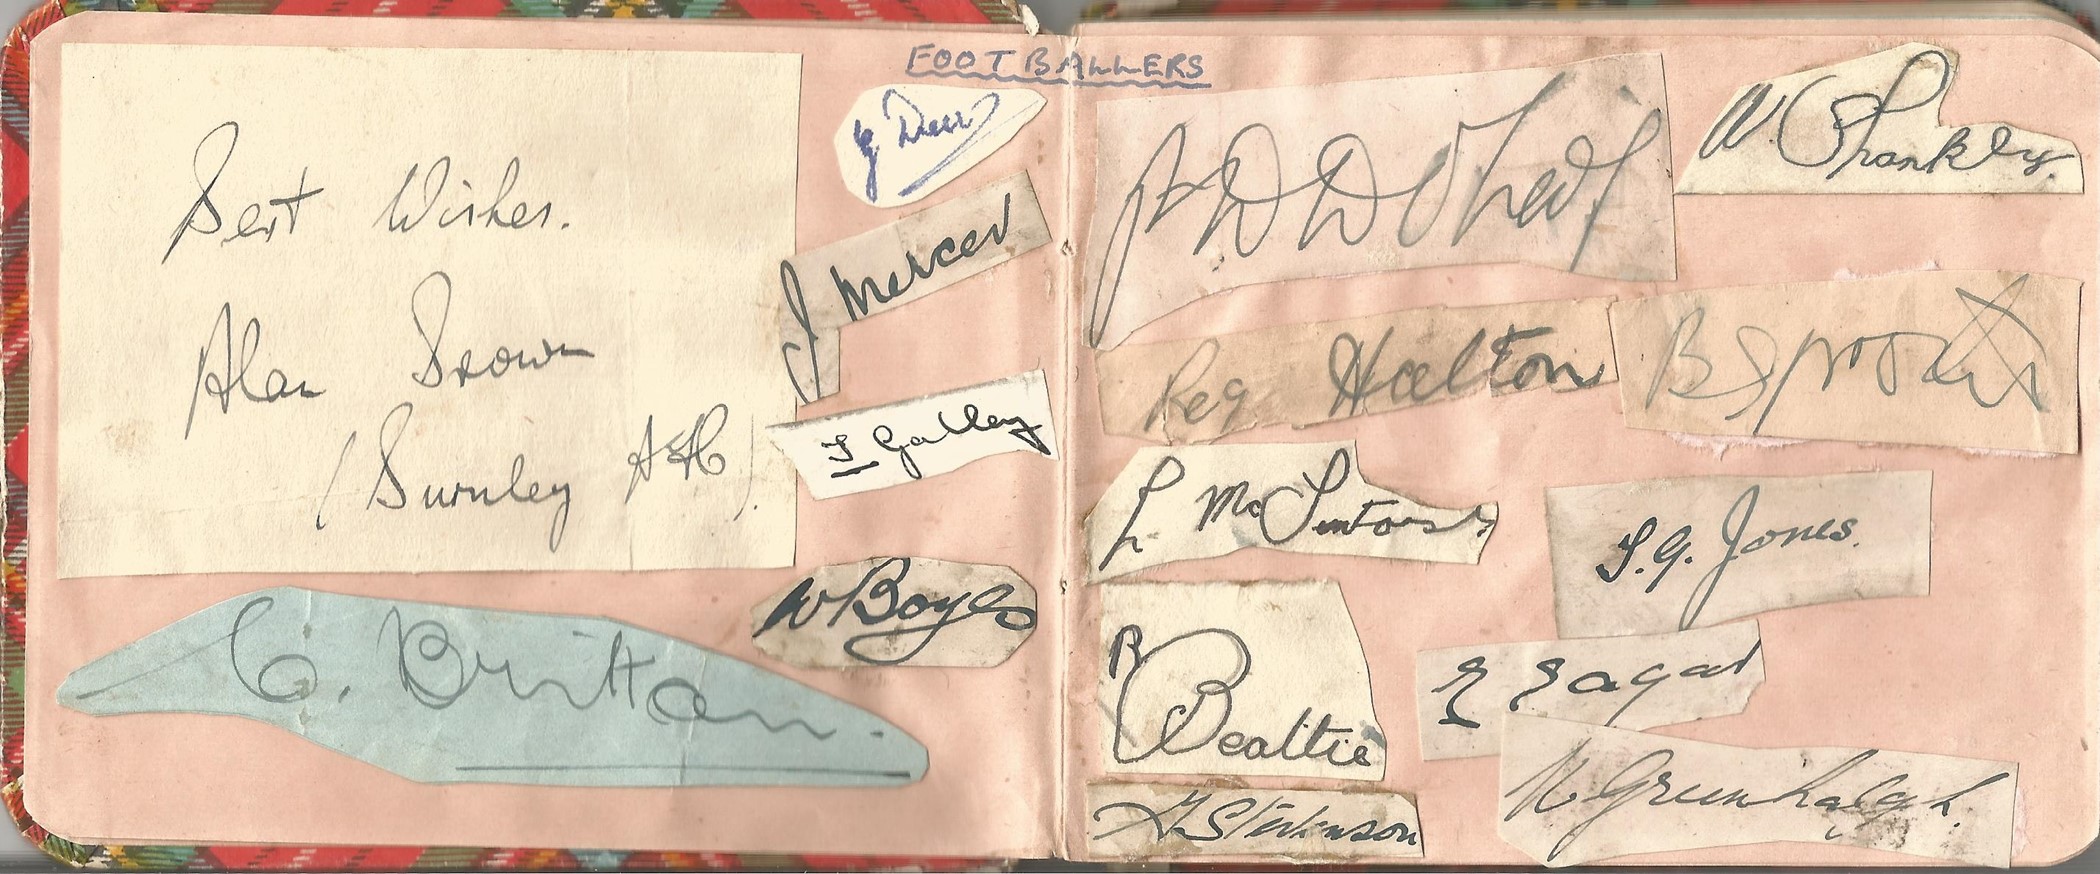 An Autograph book signed by different top sport personnel from Rugby to Swimming to Cricket, some